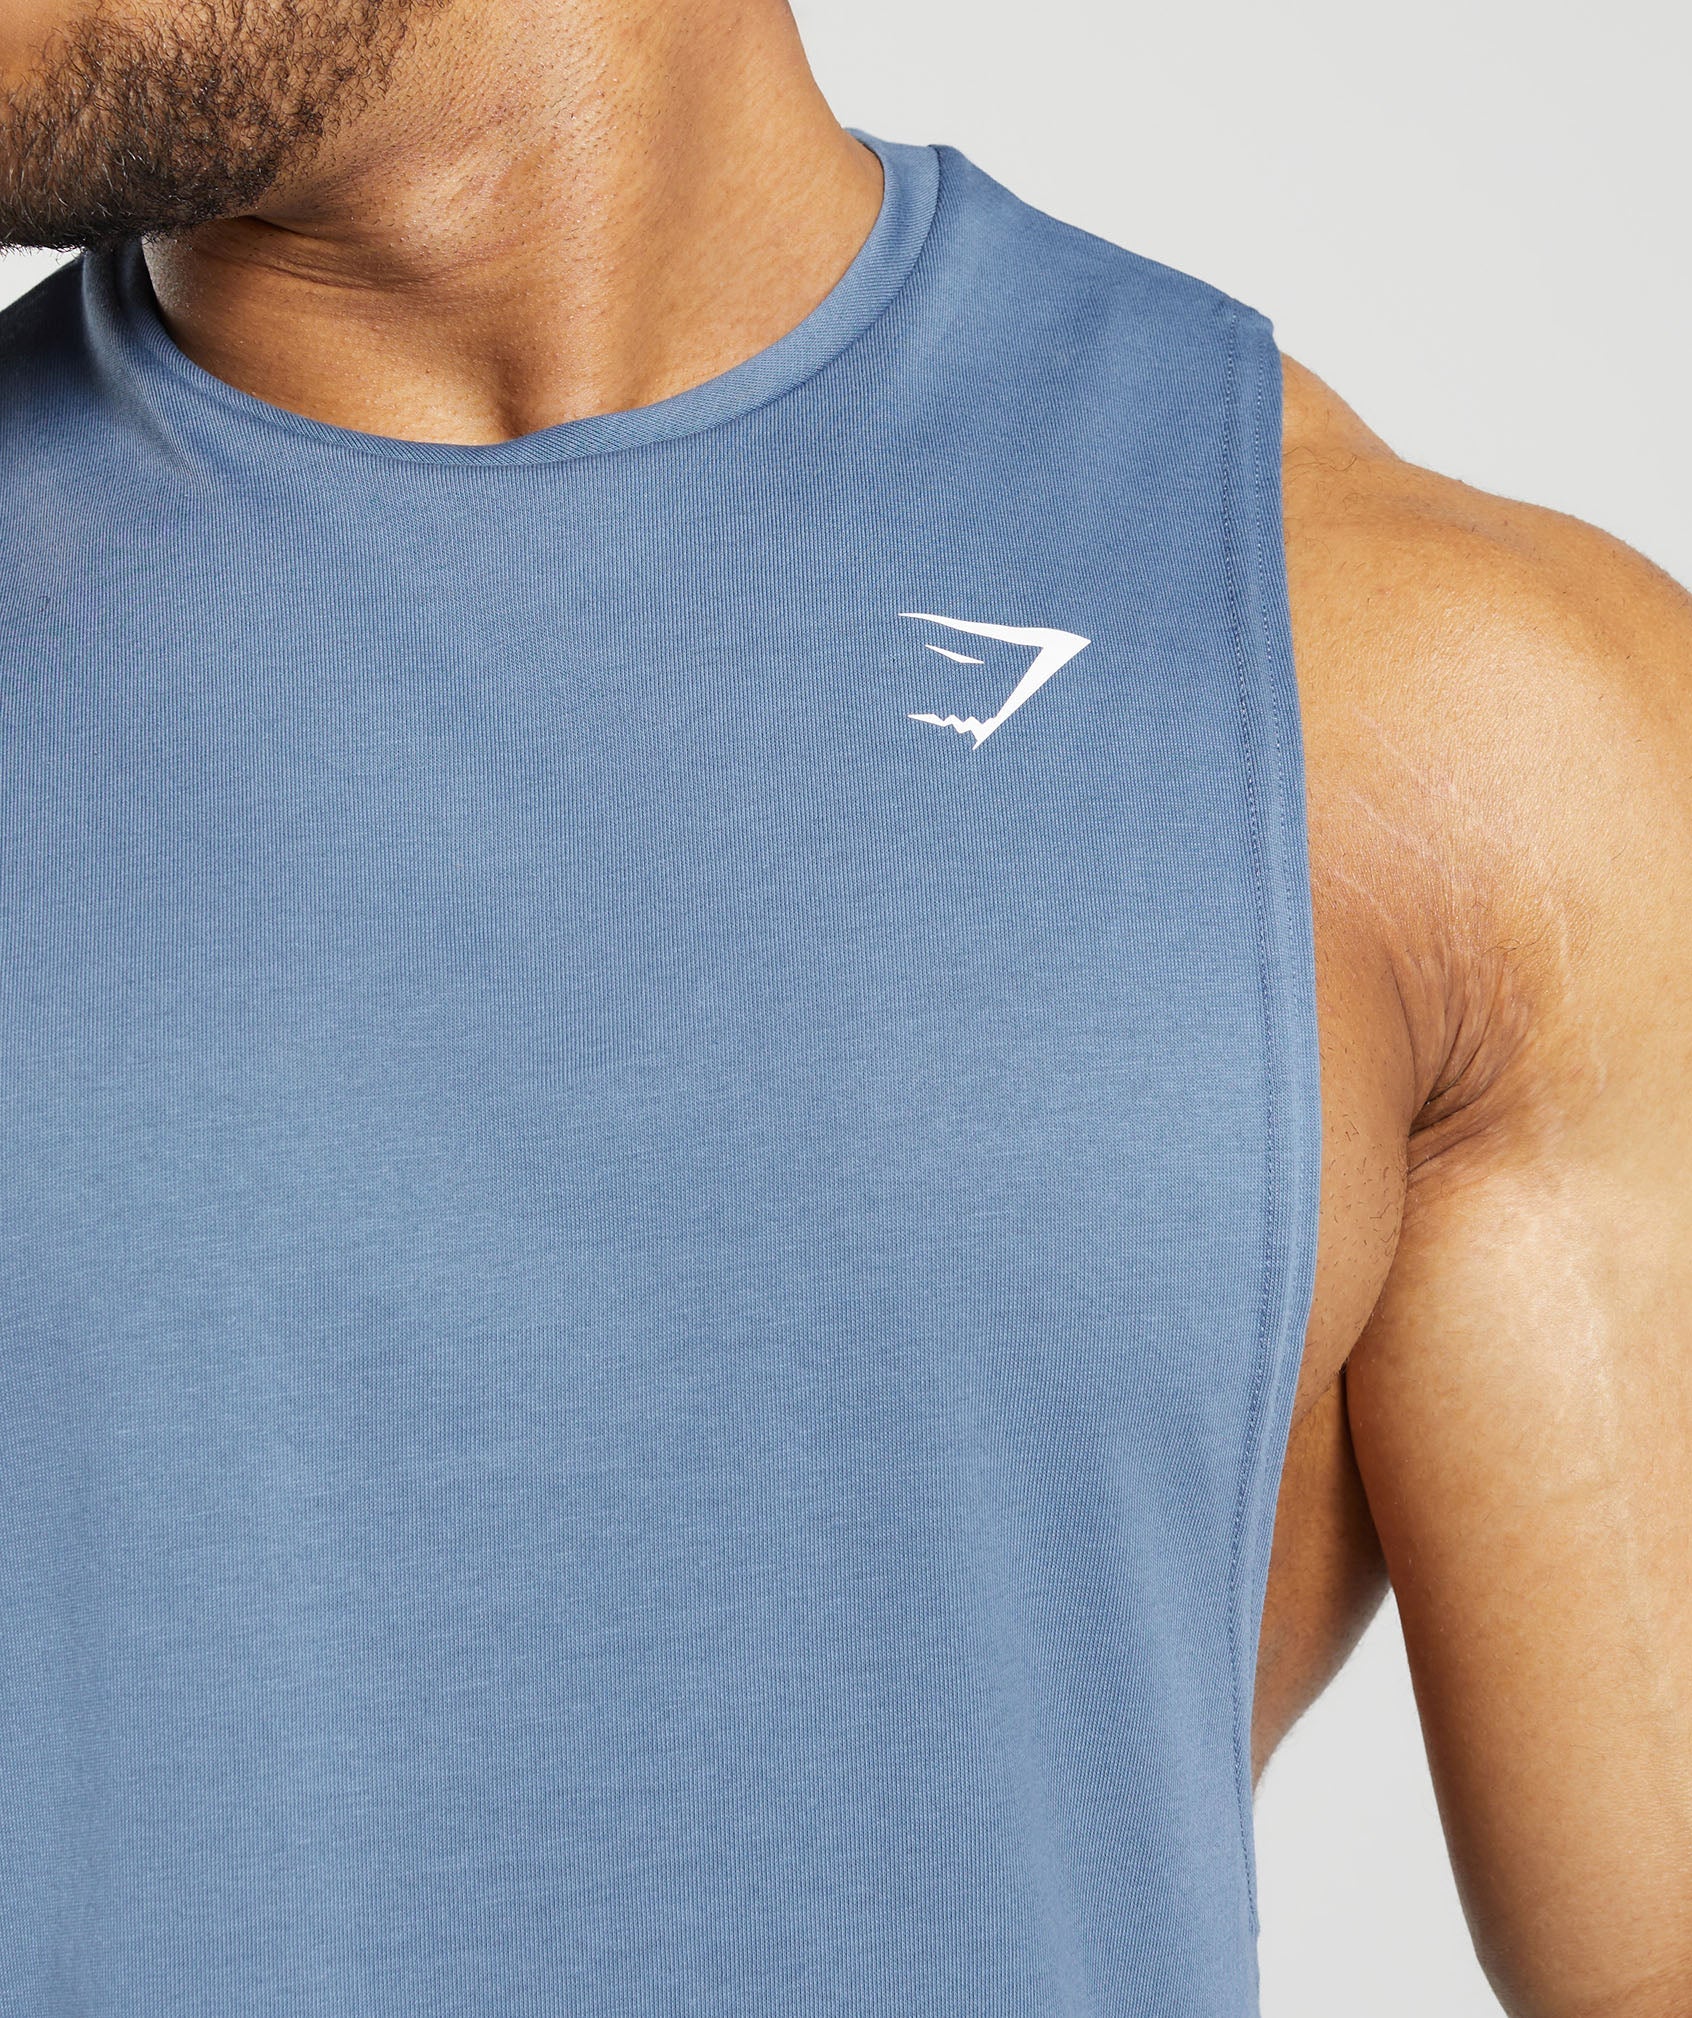 React Drop Arm Tank in Faded Blue - view 5